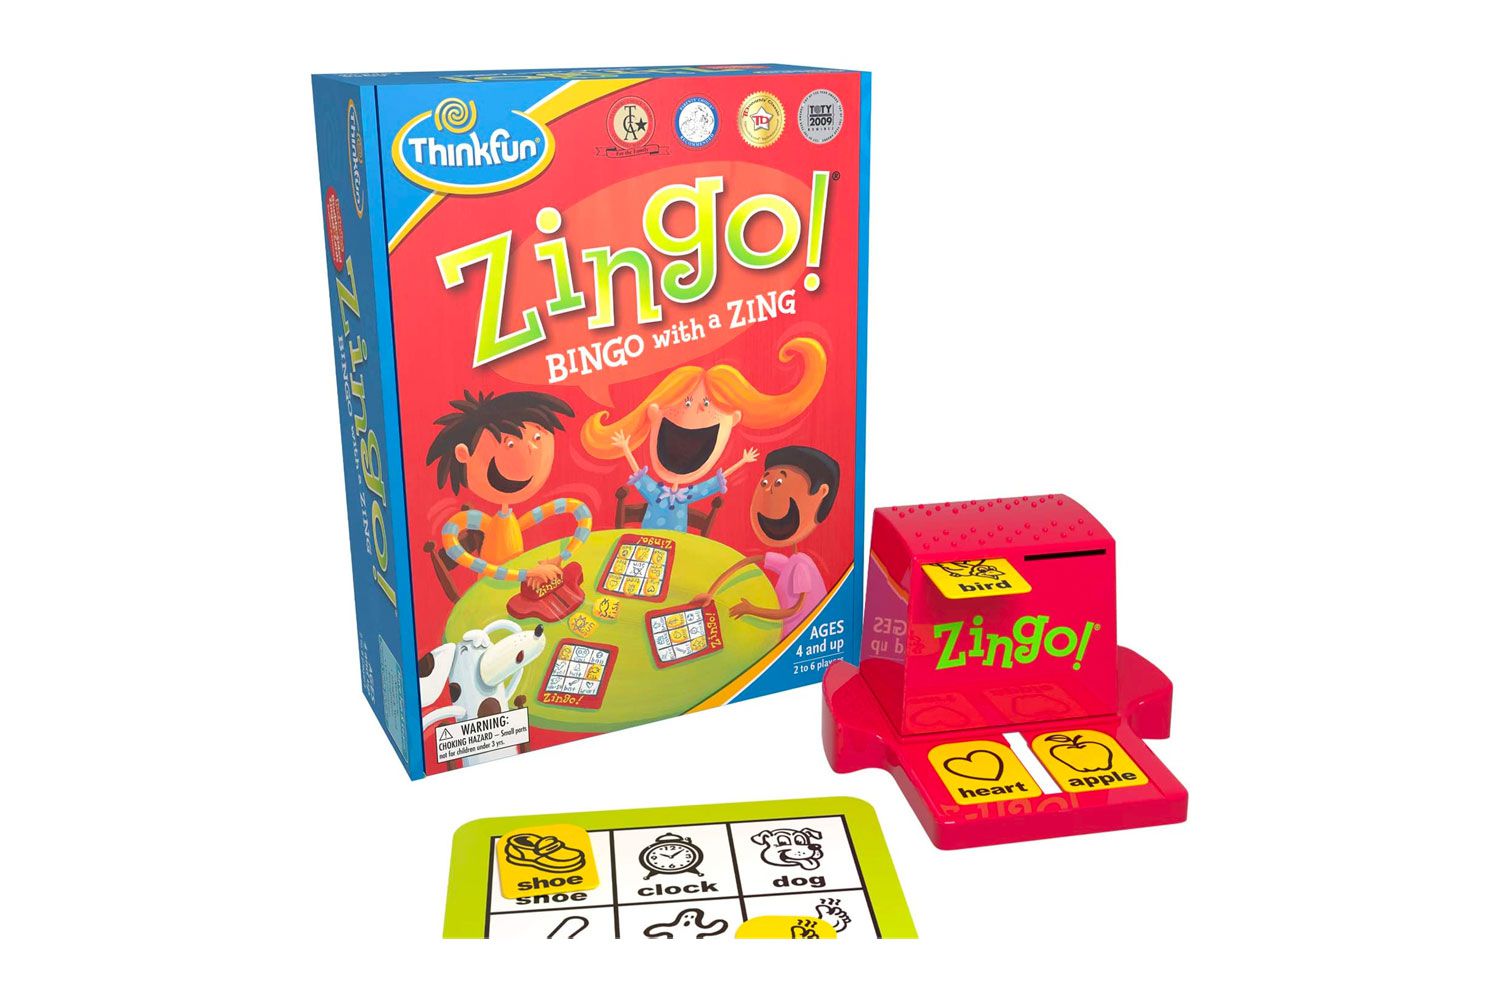 ThinkFun Zingo Bingo Award Winning Preschool Game for Pre/ Early Readers Age 4 and Up - One of the Most Popular Board Games for Boys and Girls and their...